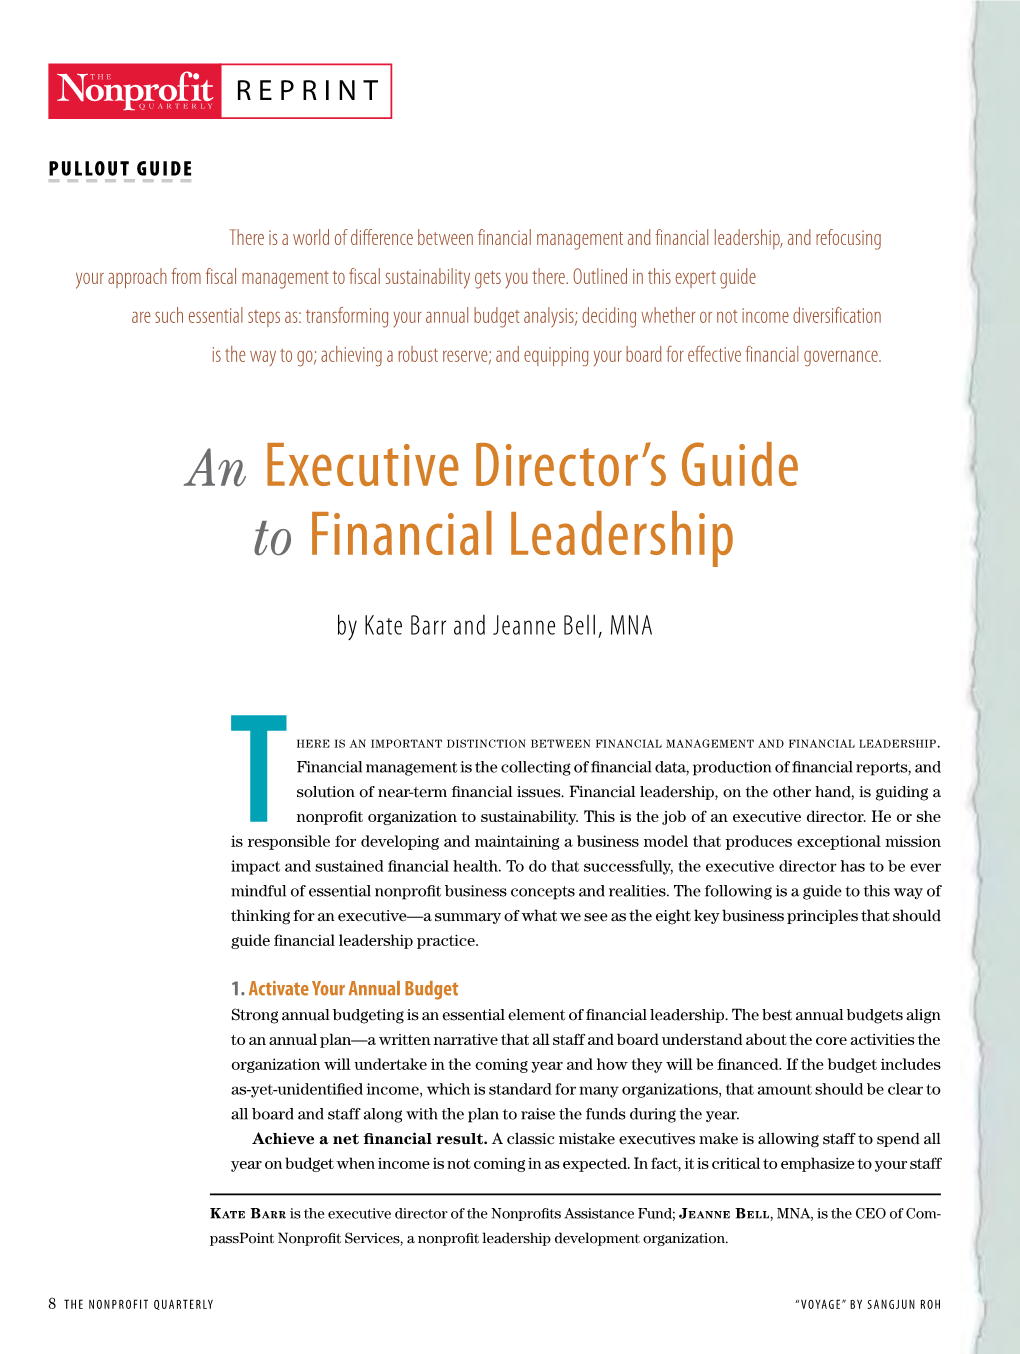 An Executive Director's Guide to Financial Leadership